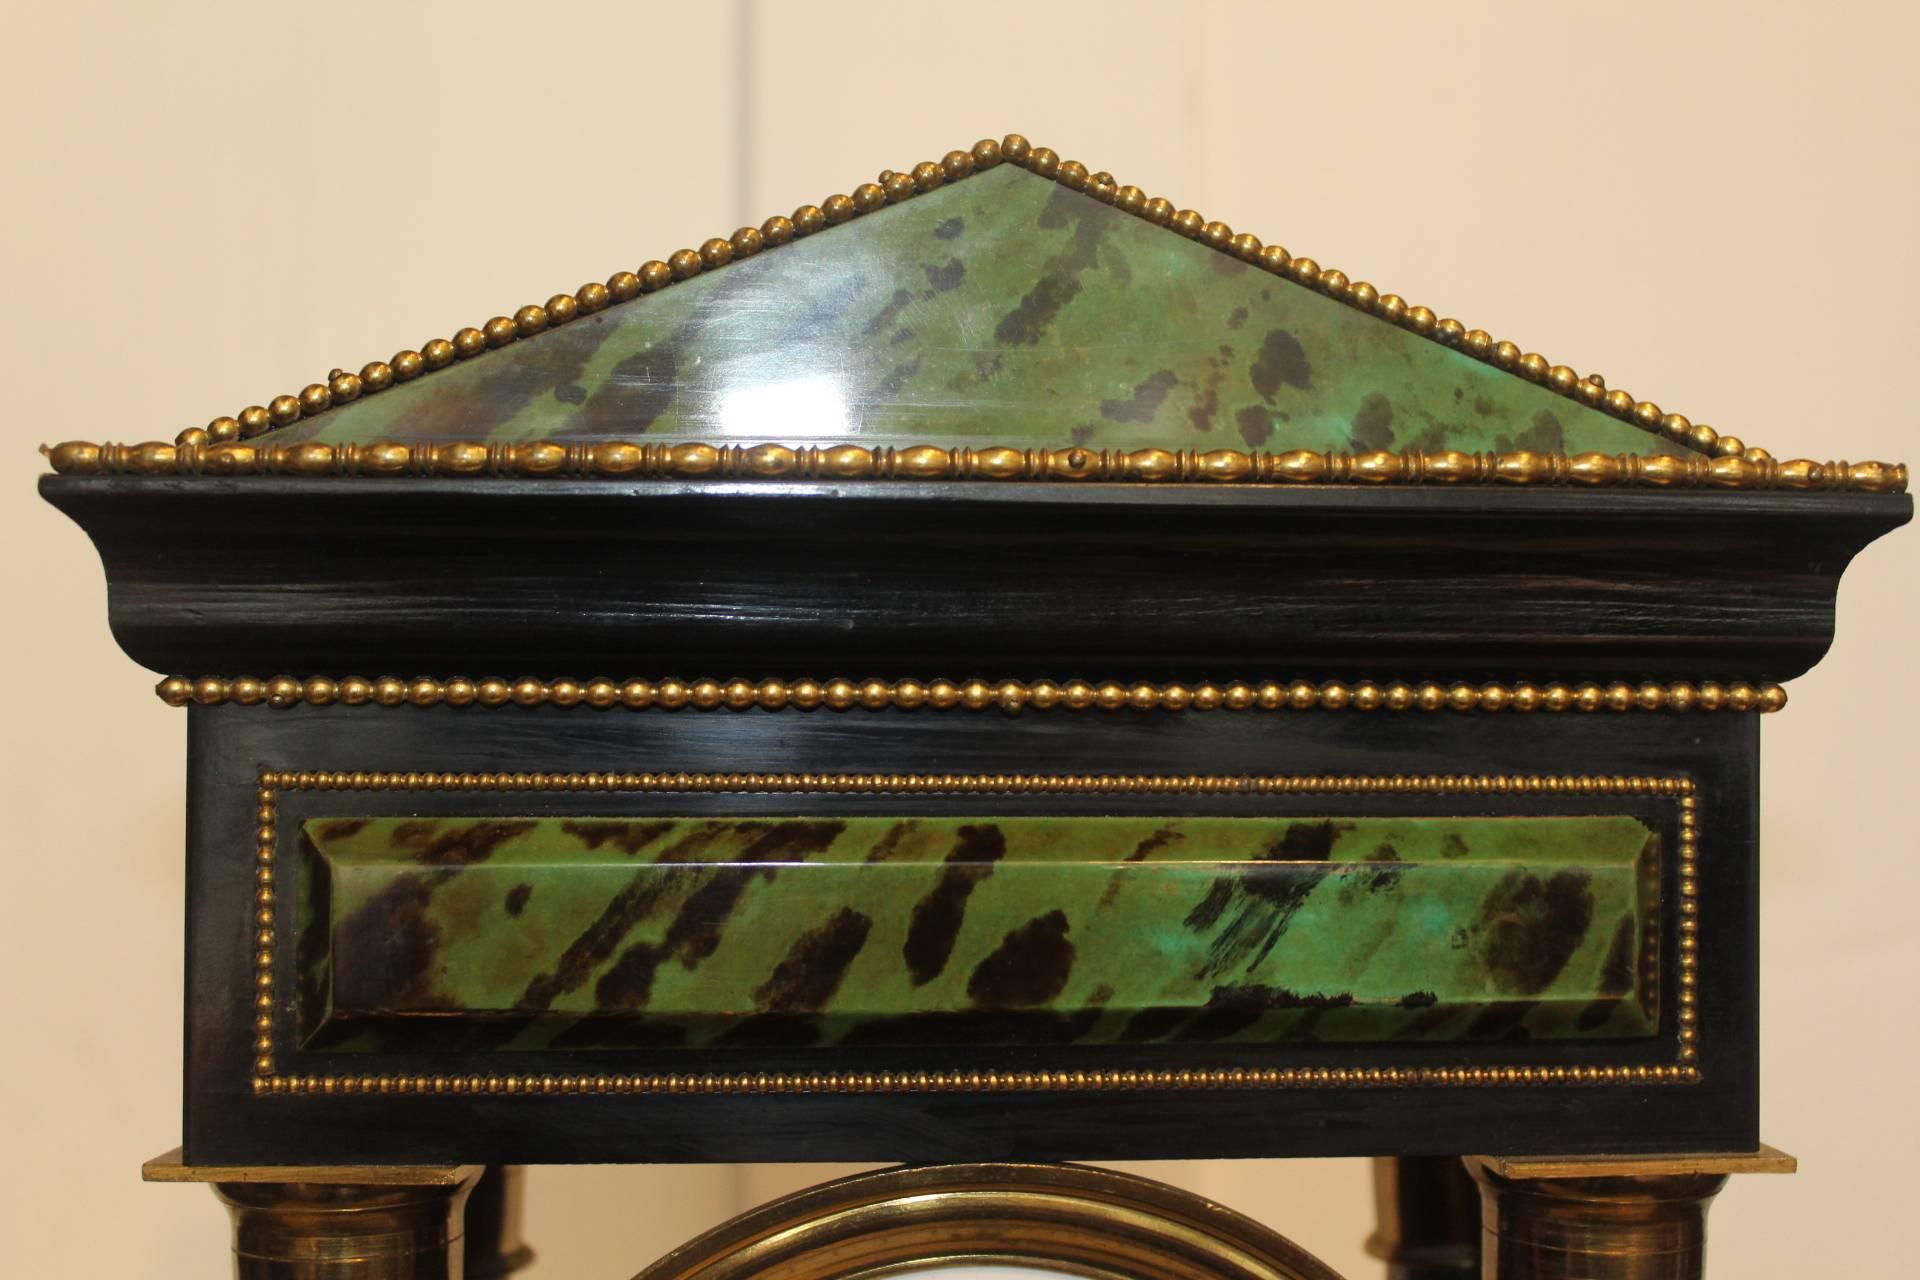 French, ebonized timber portico clock by Eugene Williez, Aix en Provence, circa 1845

Wonderful painted detailing on this faux marble portico clock. The green colouring complimenting the ebonised timber and intact brass beading. The barley twist